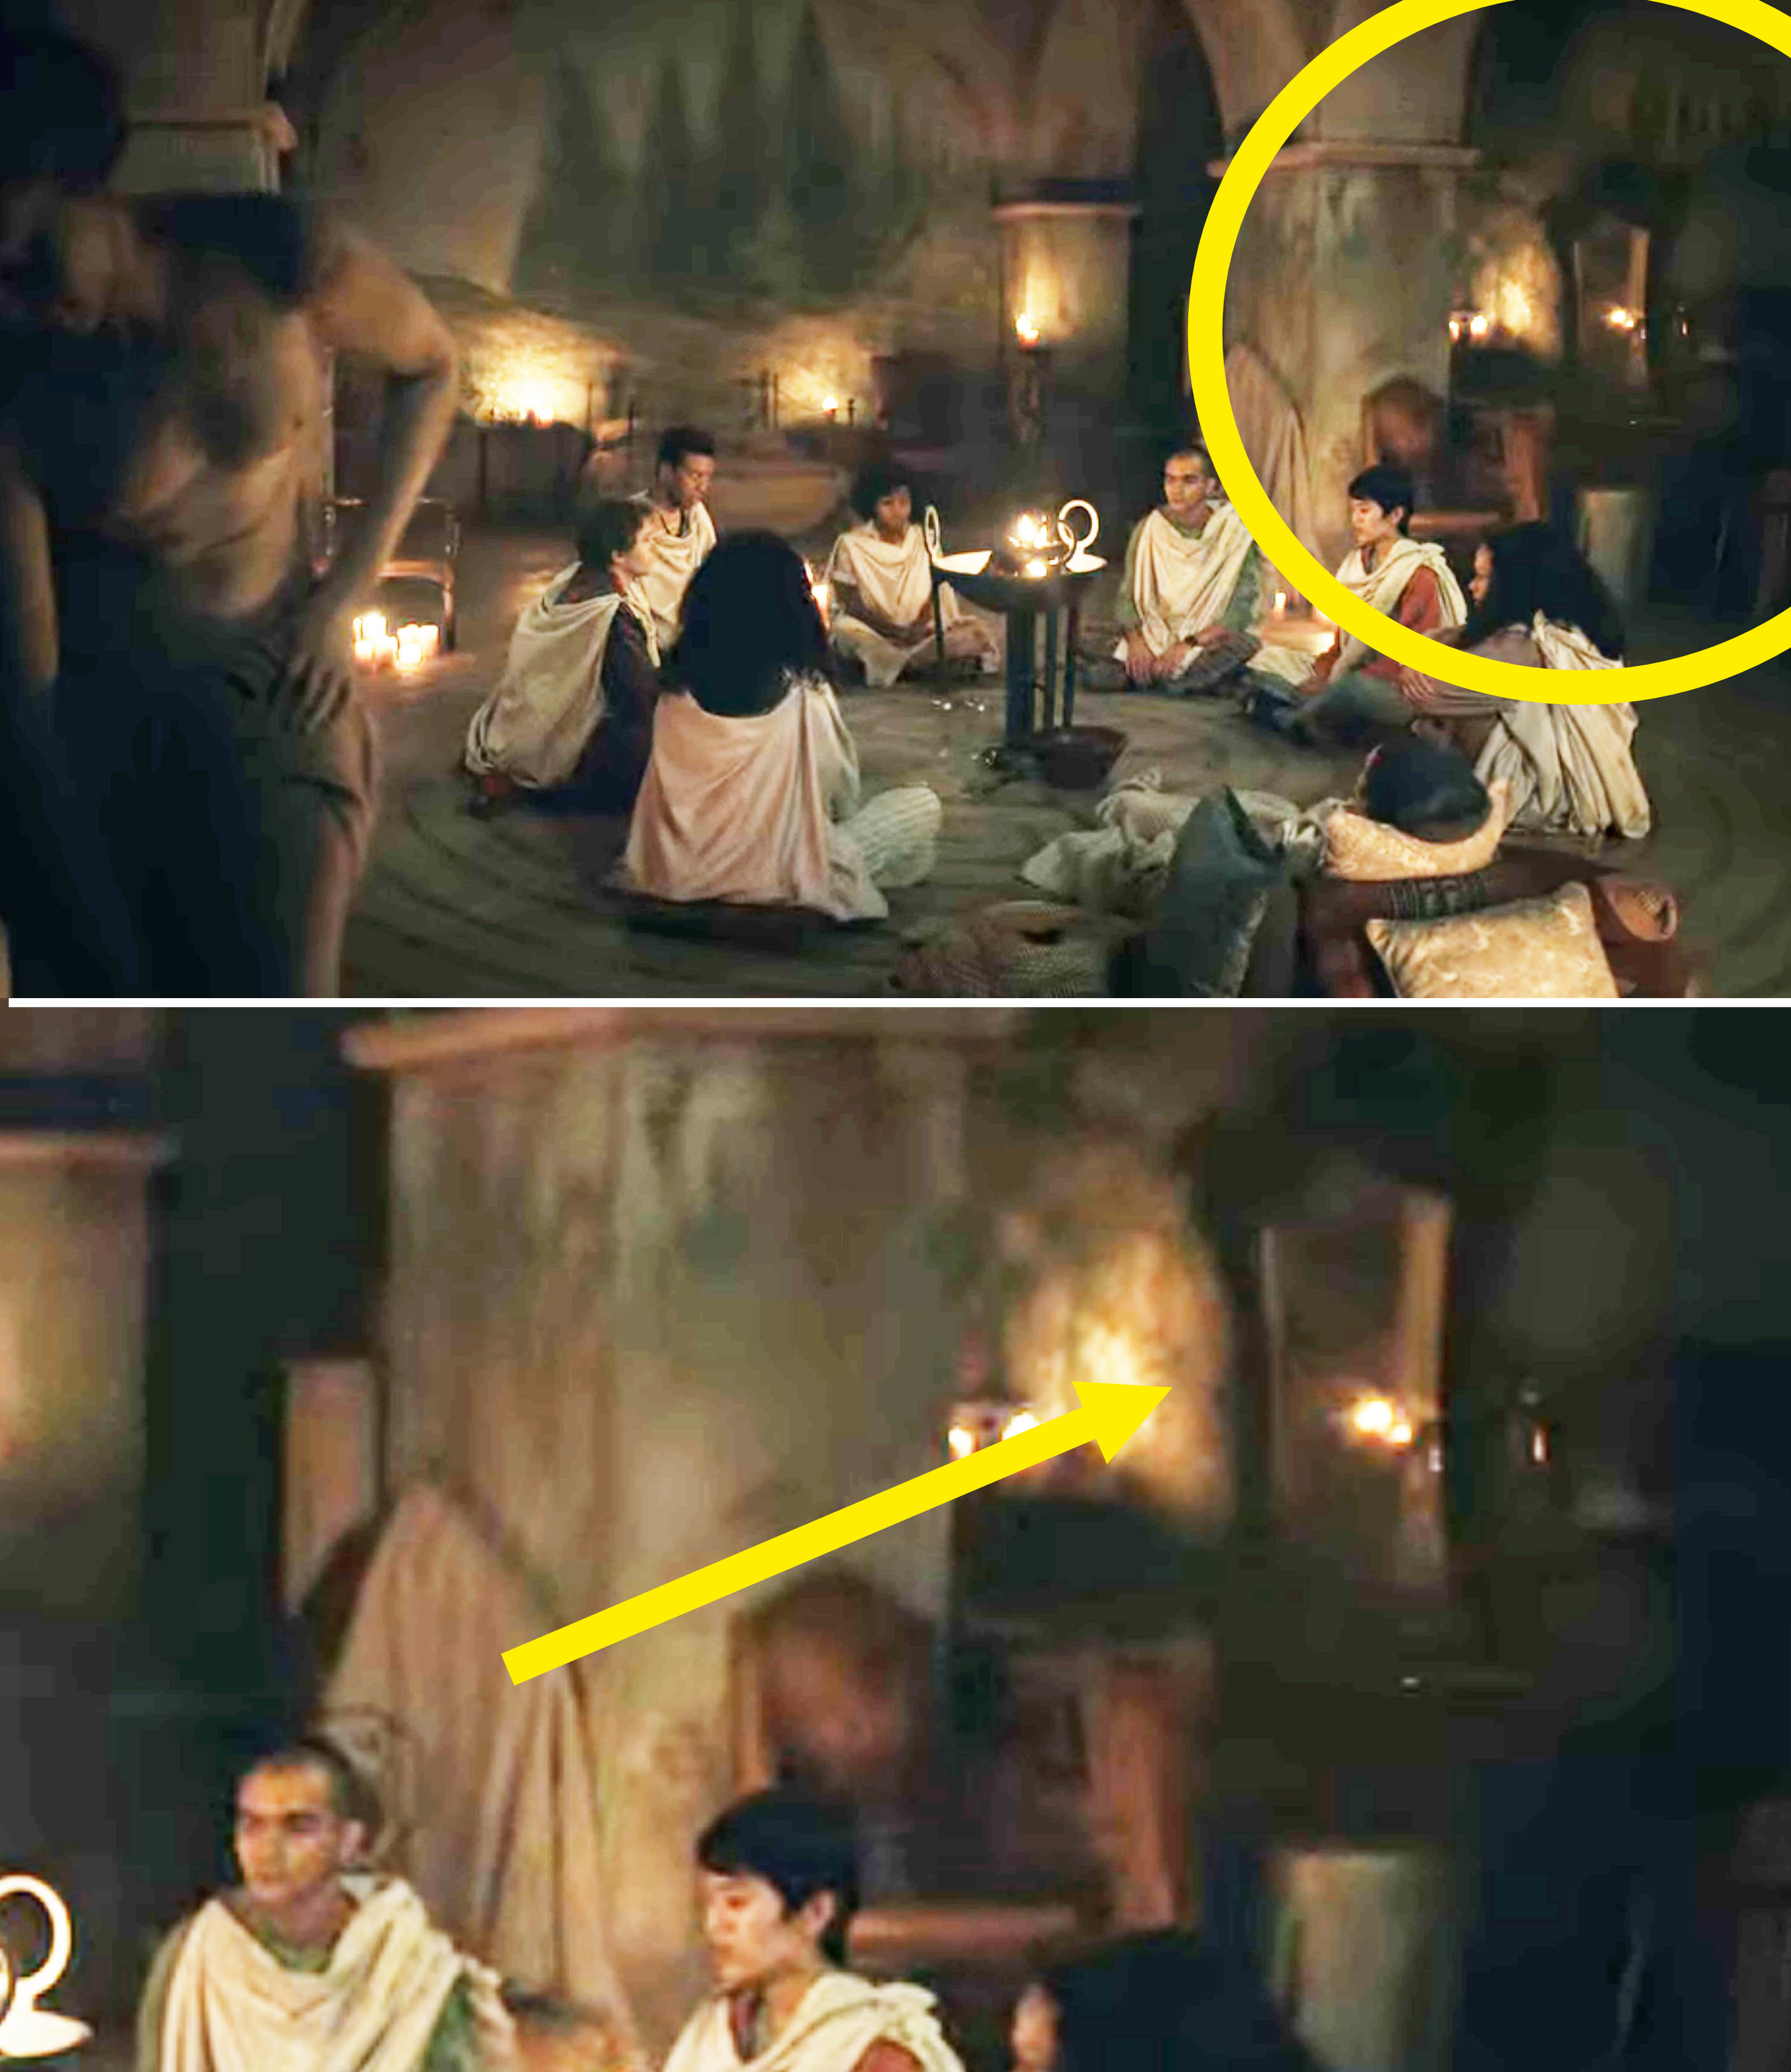 the glass circled and an arrow pointing to it in the background of the scene